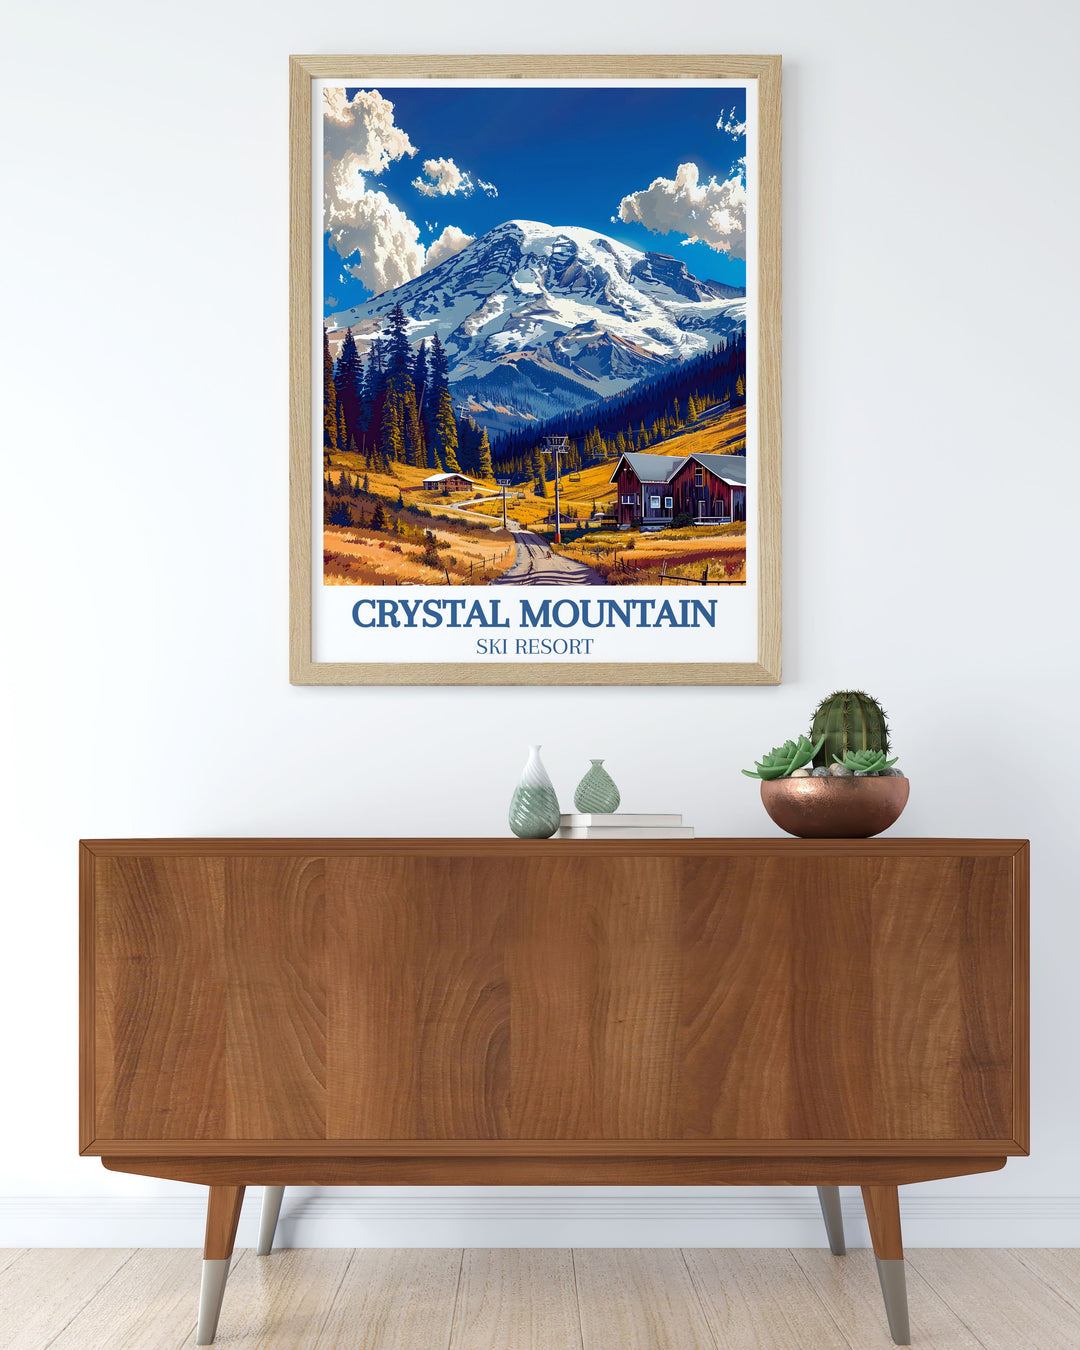 This travel poster highlights the exhilarating snowboarding opportunities at Crystal Mountain, set against the stunning backdrop of Washingtons Cascade Range.